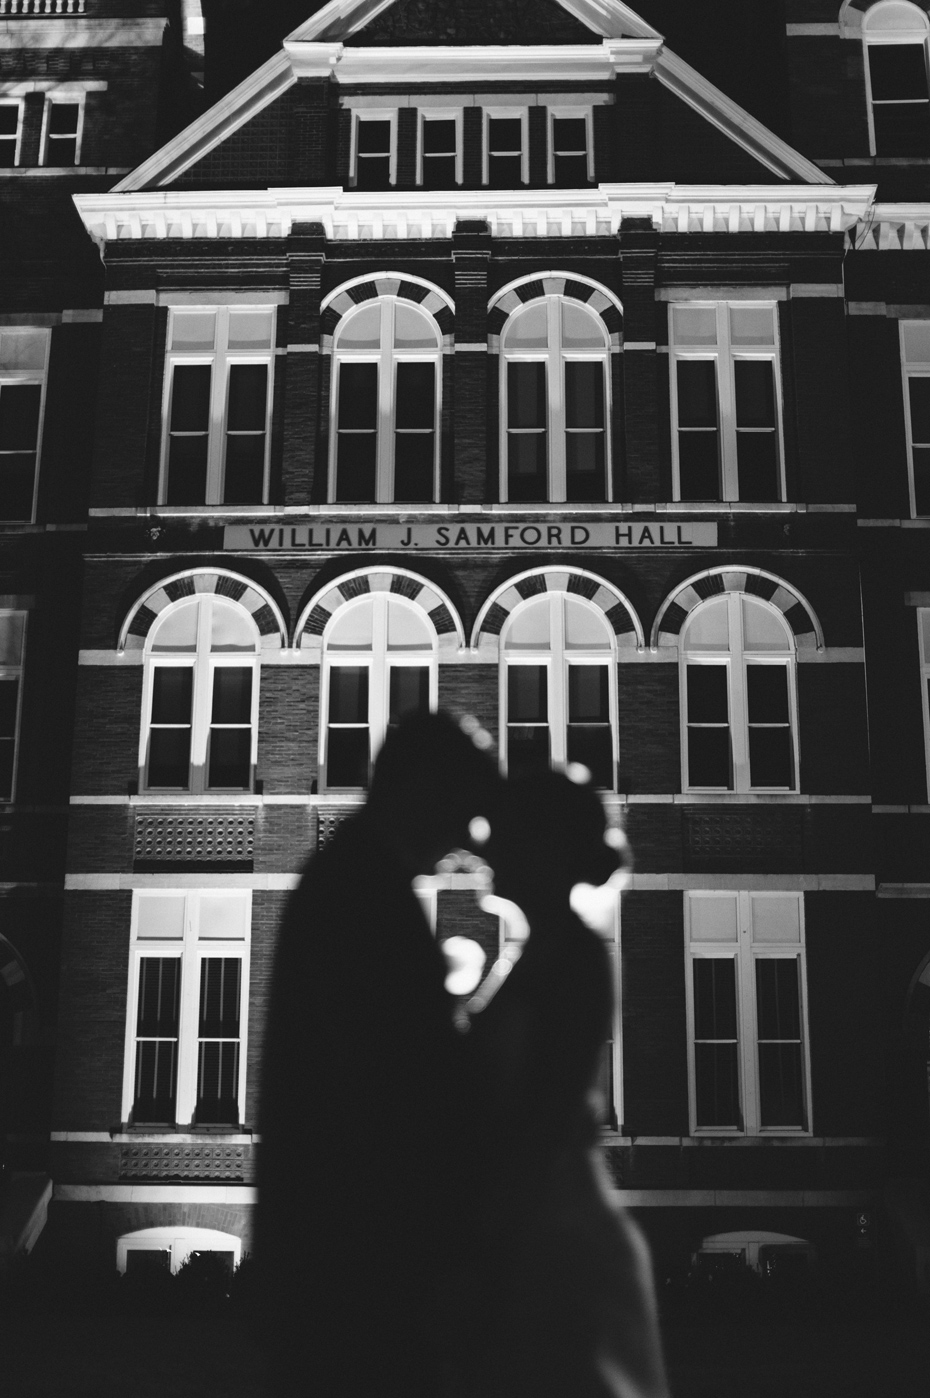 The bride and groom share one last portrait in front of Samford Hall in Auburn Alabama, photographed by Ann Arbor Wedding Photographer Heather Jowett.